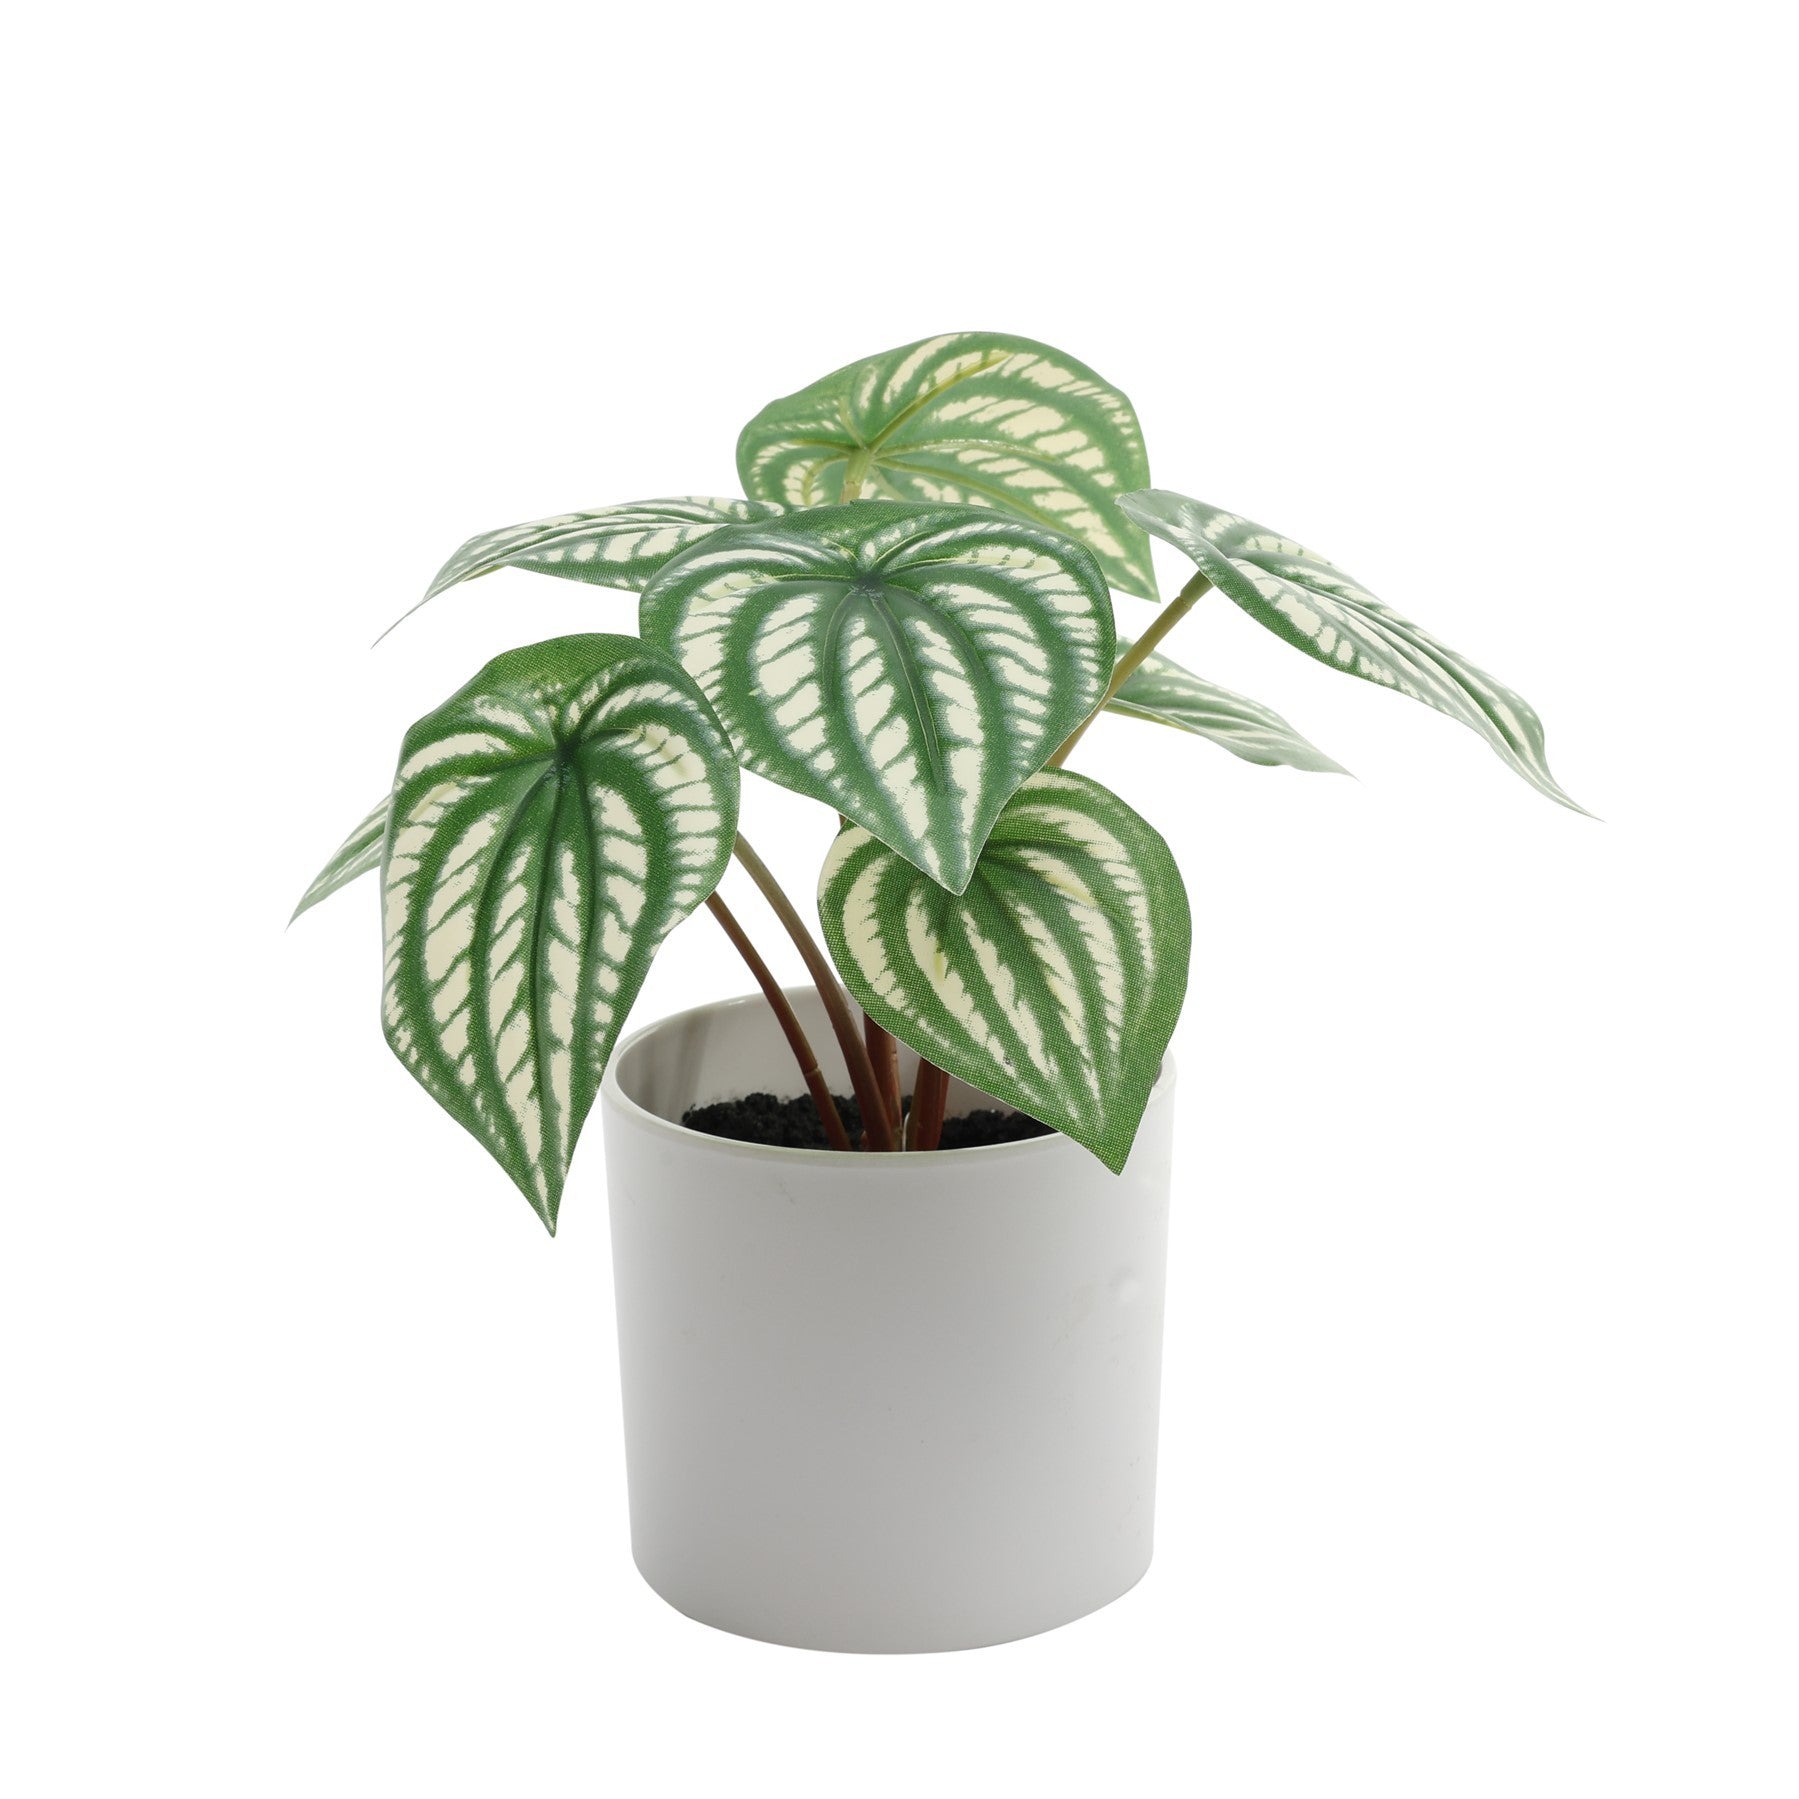 View Calathea Potted House Plant 20cm information